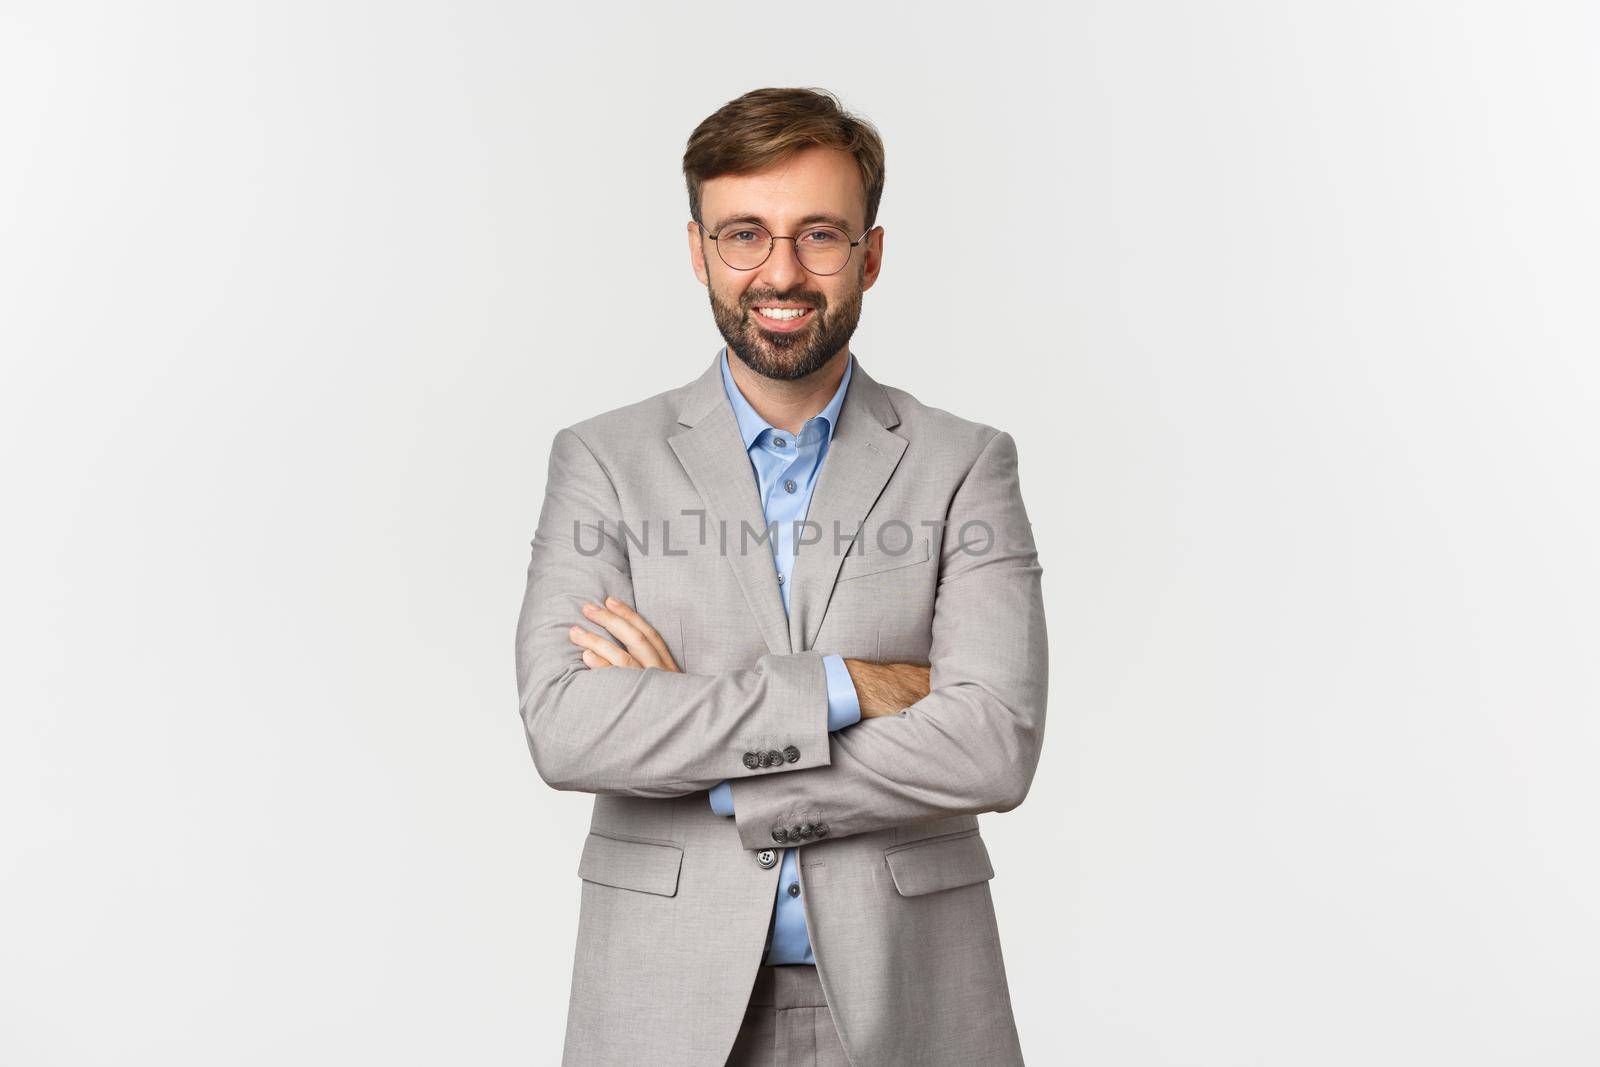 Image of successful and confident businessman with beard, wearing grey suit and glasses, cross arms on chest and smiling satisfied, standing over white background.